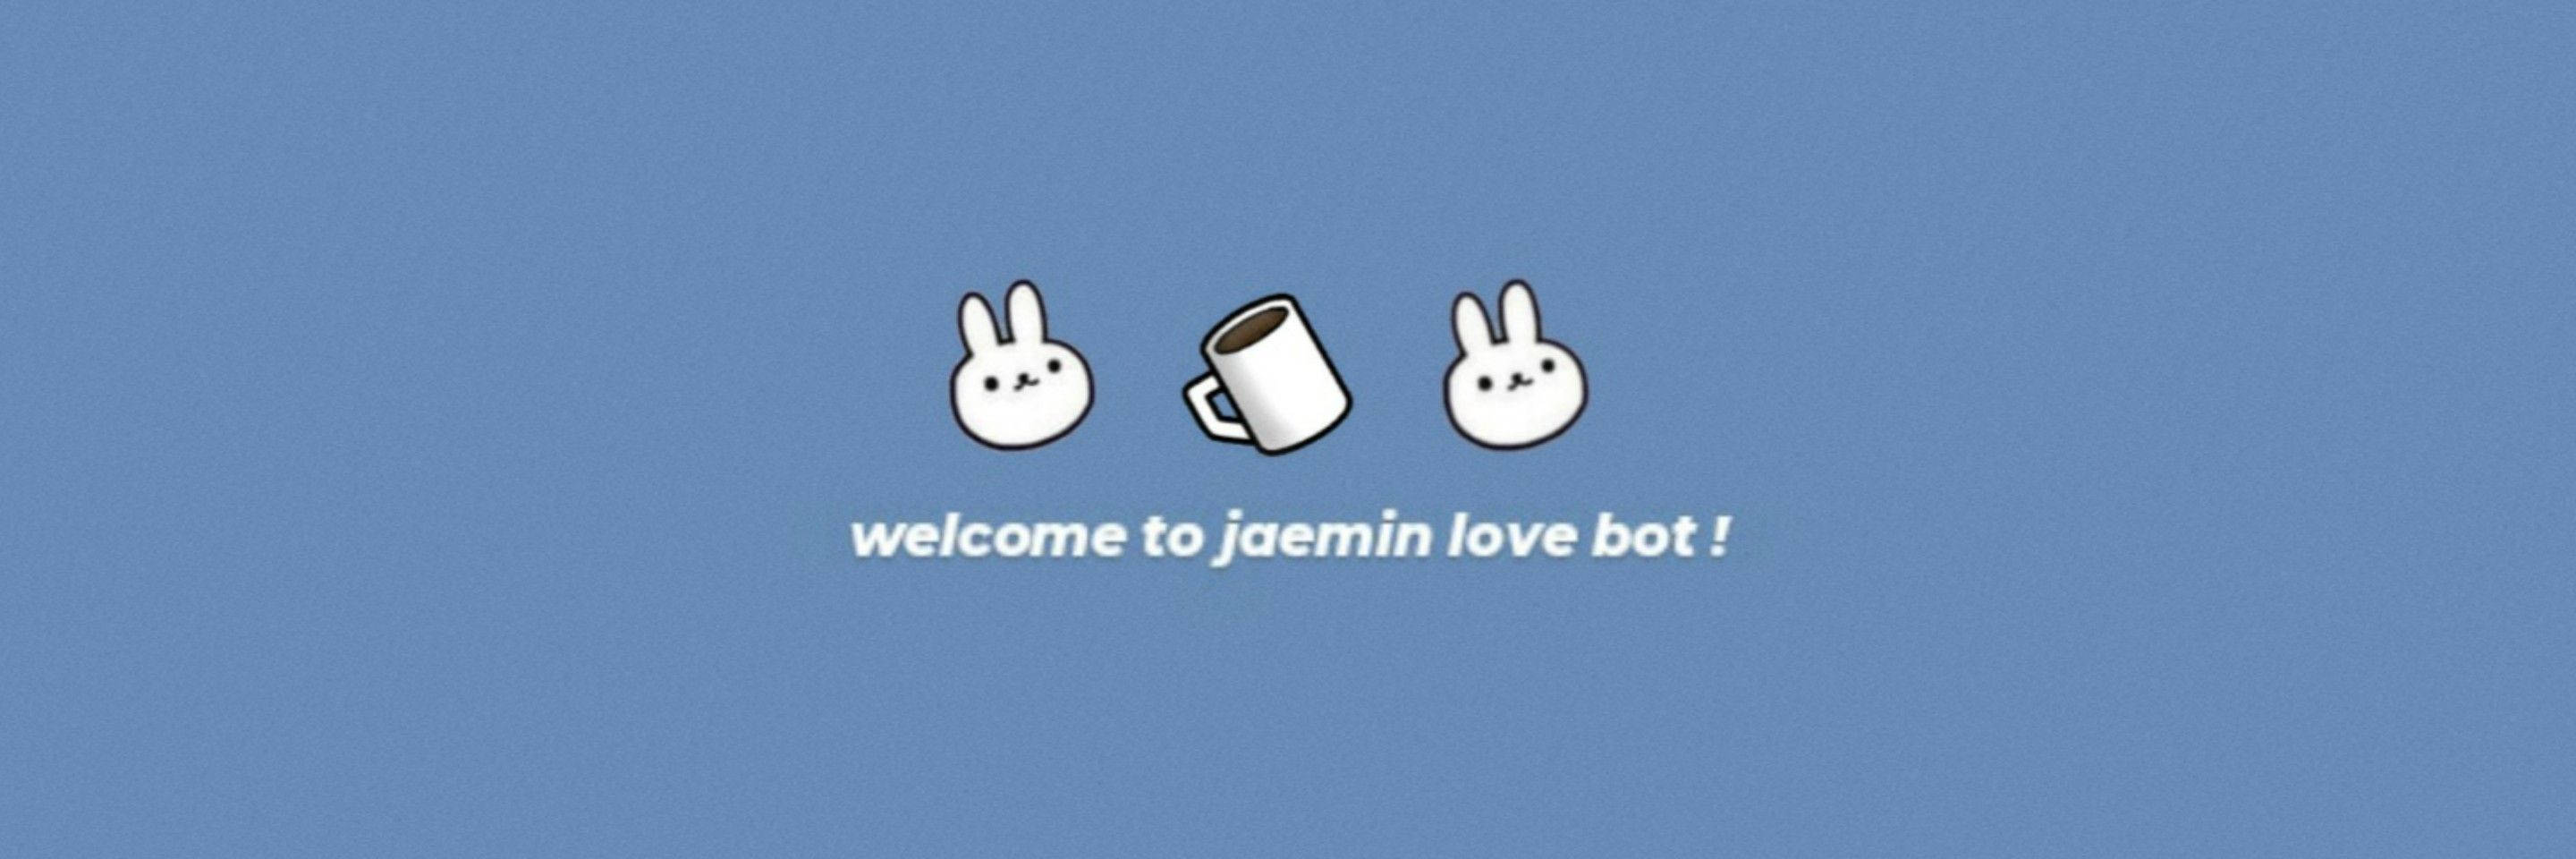 Cute Rabbit And Coffee Twitter Header Background